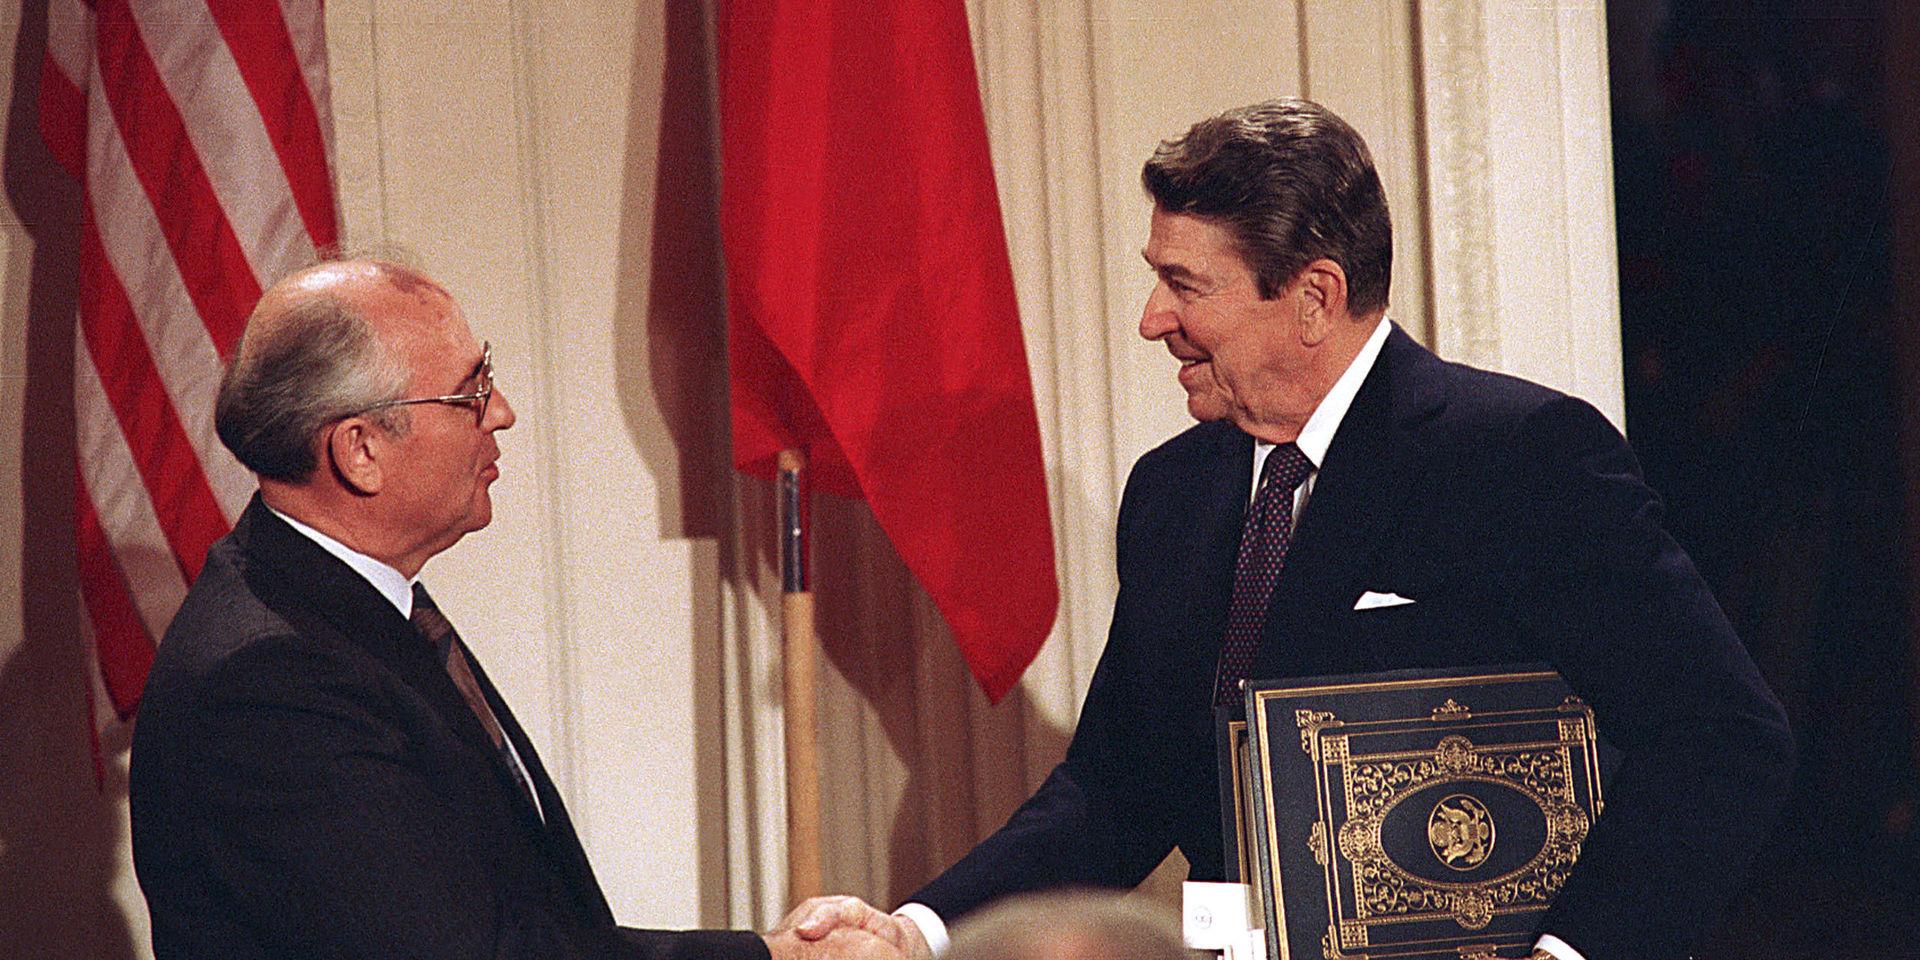 ** FILE ** U.S. President Ronald Reagan, right, shakes hands with Soviet leader Mikhail Gorbachev after the two leaders signed the Intermediate Range Nuclear Forces Treaty to eliminate intermediate-range missiles during a ceremony in the White House East Room in Washington, D.C., in this Tuesday, Dec. 8, 1987 file photo.  Speaking on a U.S. proposal to base a missile shield in Poland and the Czech Republic Russian missile forces chief Gen. Nikolai Solovtsov warned Monday Feb. 19, 2007 that the plan could prompt Moscow to target the former allies with its own missiles. Gen. Solovtsov said it would take only five, six years _ maybe less _ to build new, upgraded versions of Russian missiles scrapped under the INF Treaty.(AP Photo/Bob Daugherty, File)    